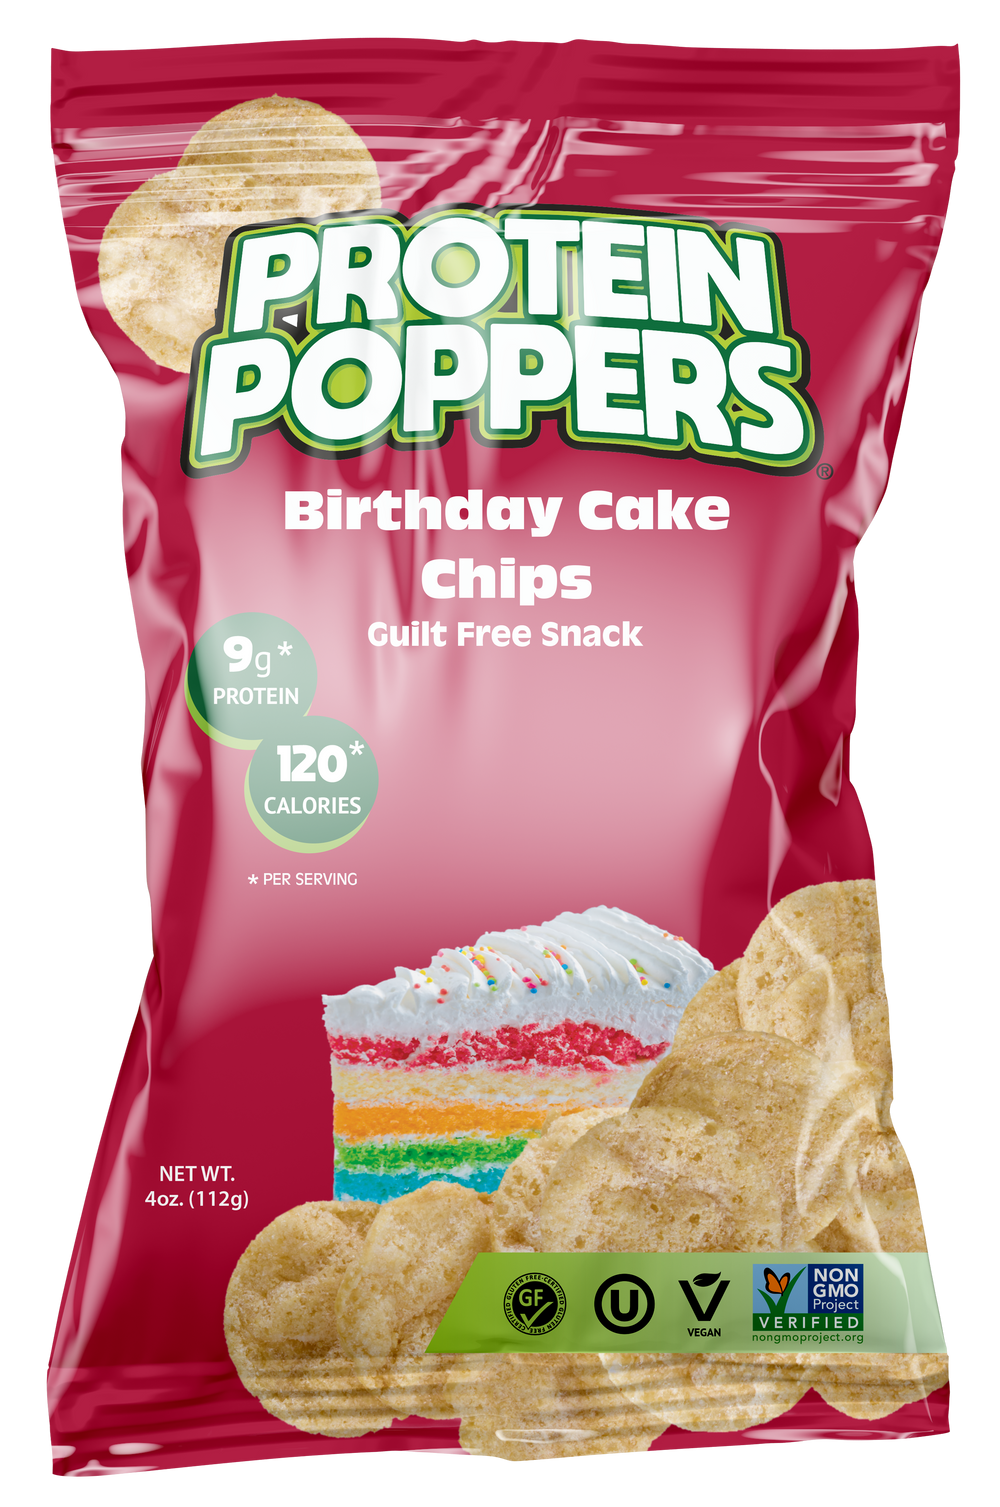 Protein Poppers Birthday Cake Multipack 8 Pack